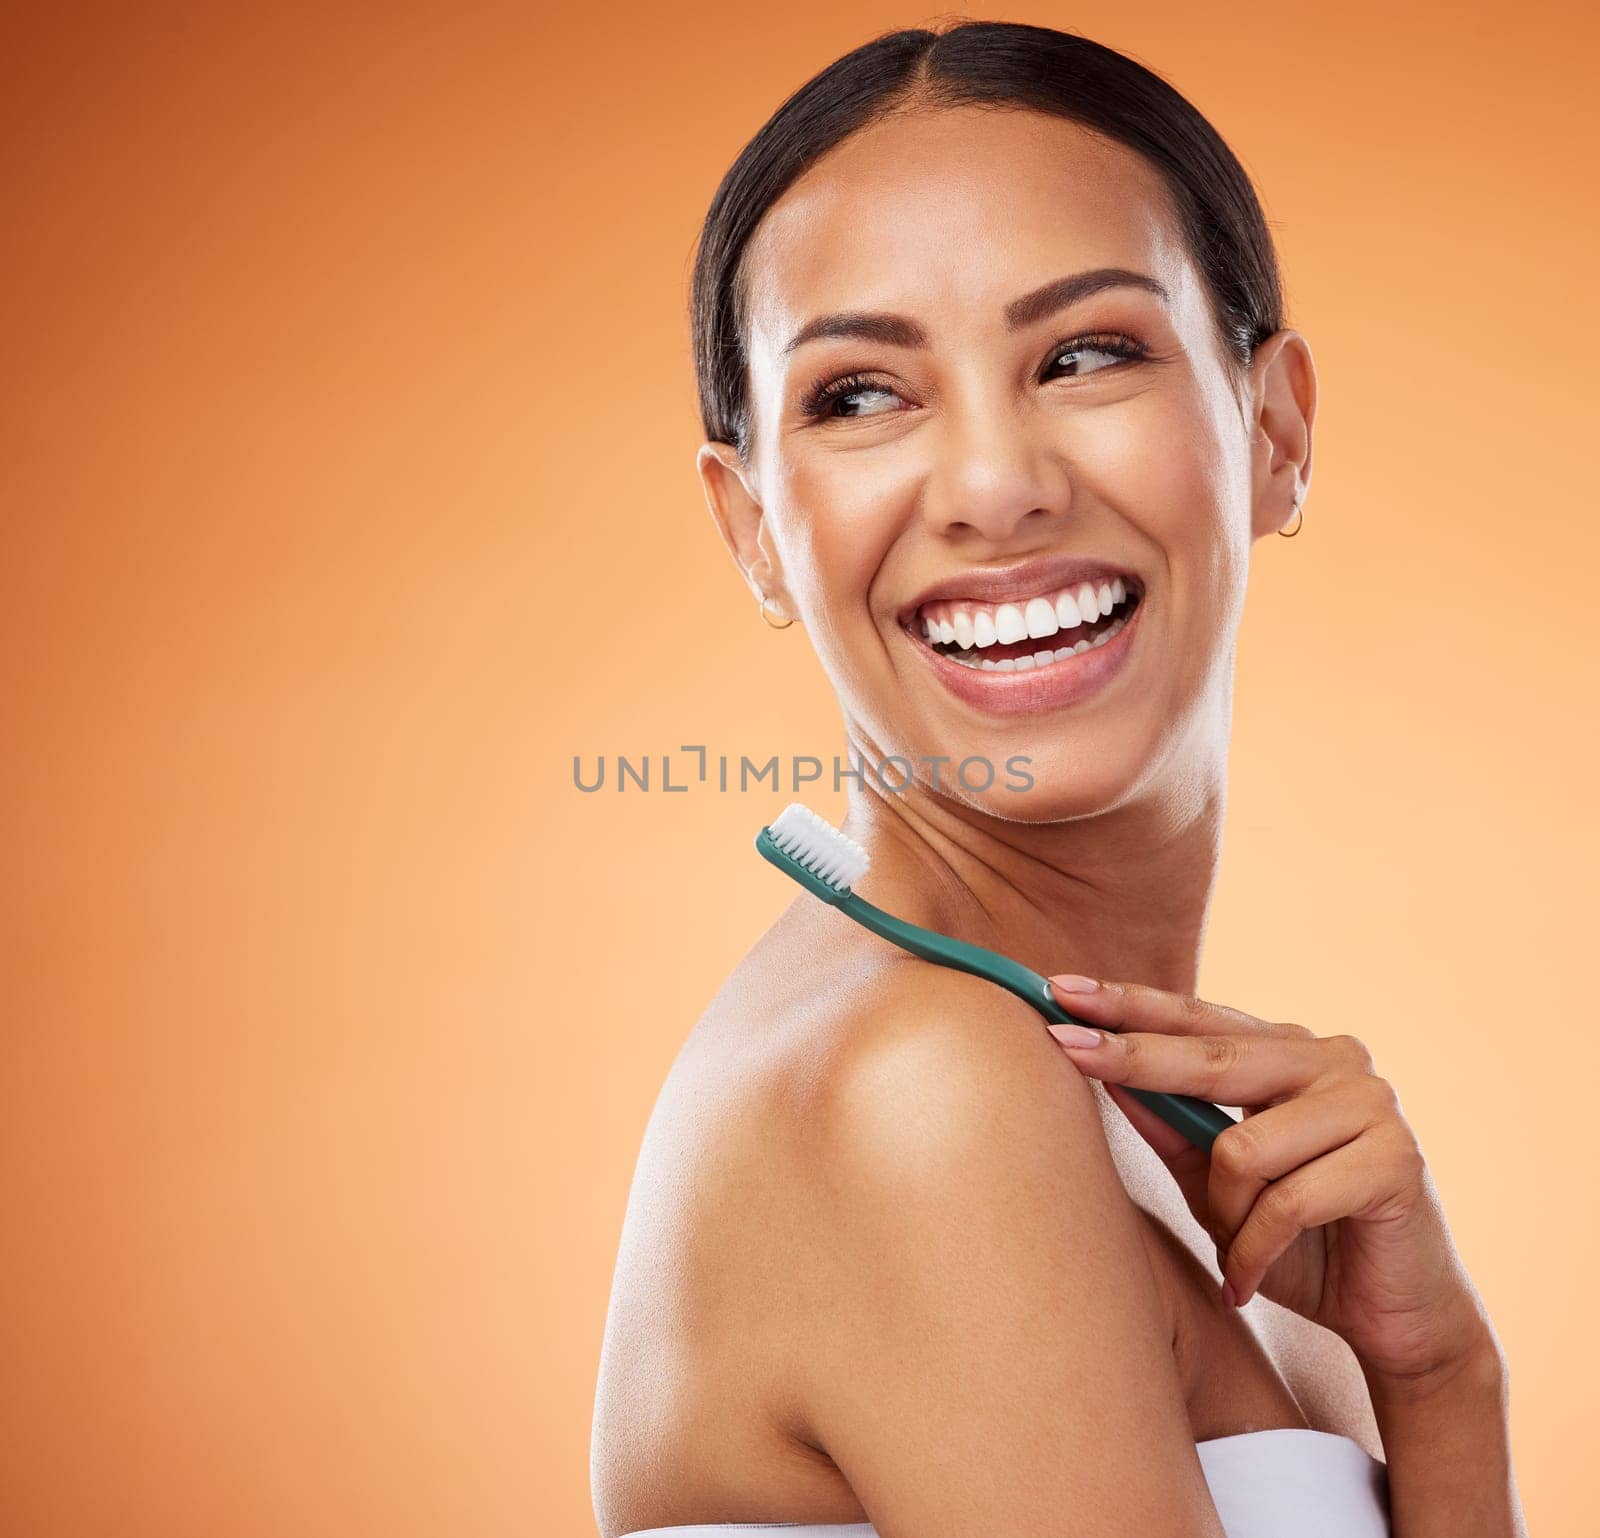 Toothbrush, dental care and woman with a smile in a studio with an orange background with mockup space. Healthy teeth, happy and girl model from Puerto Rico with mouth hygiene routine for oral health by YuriArcurs